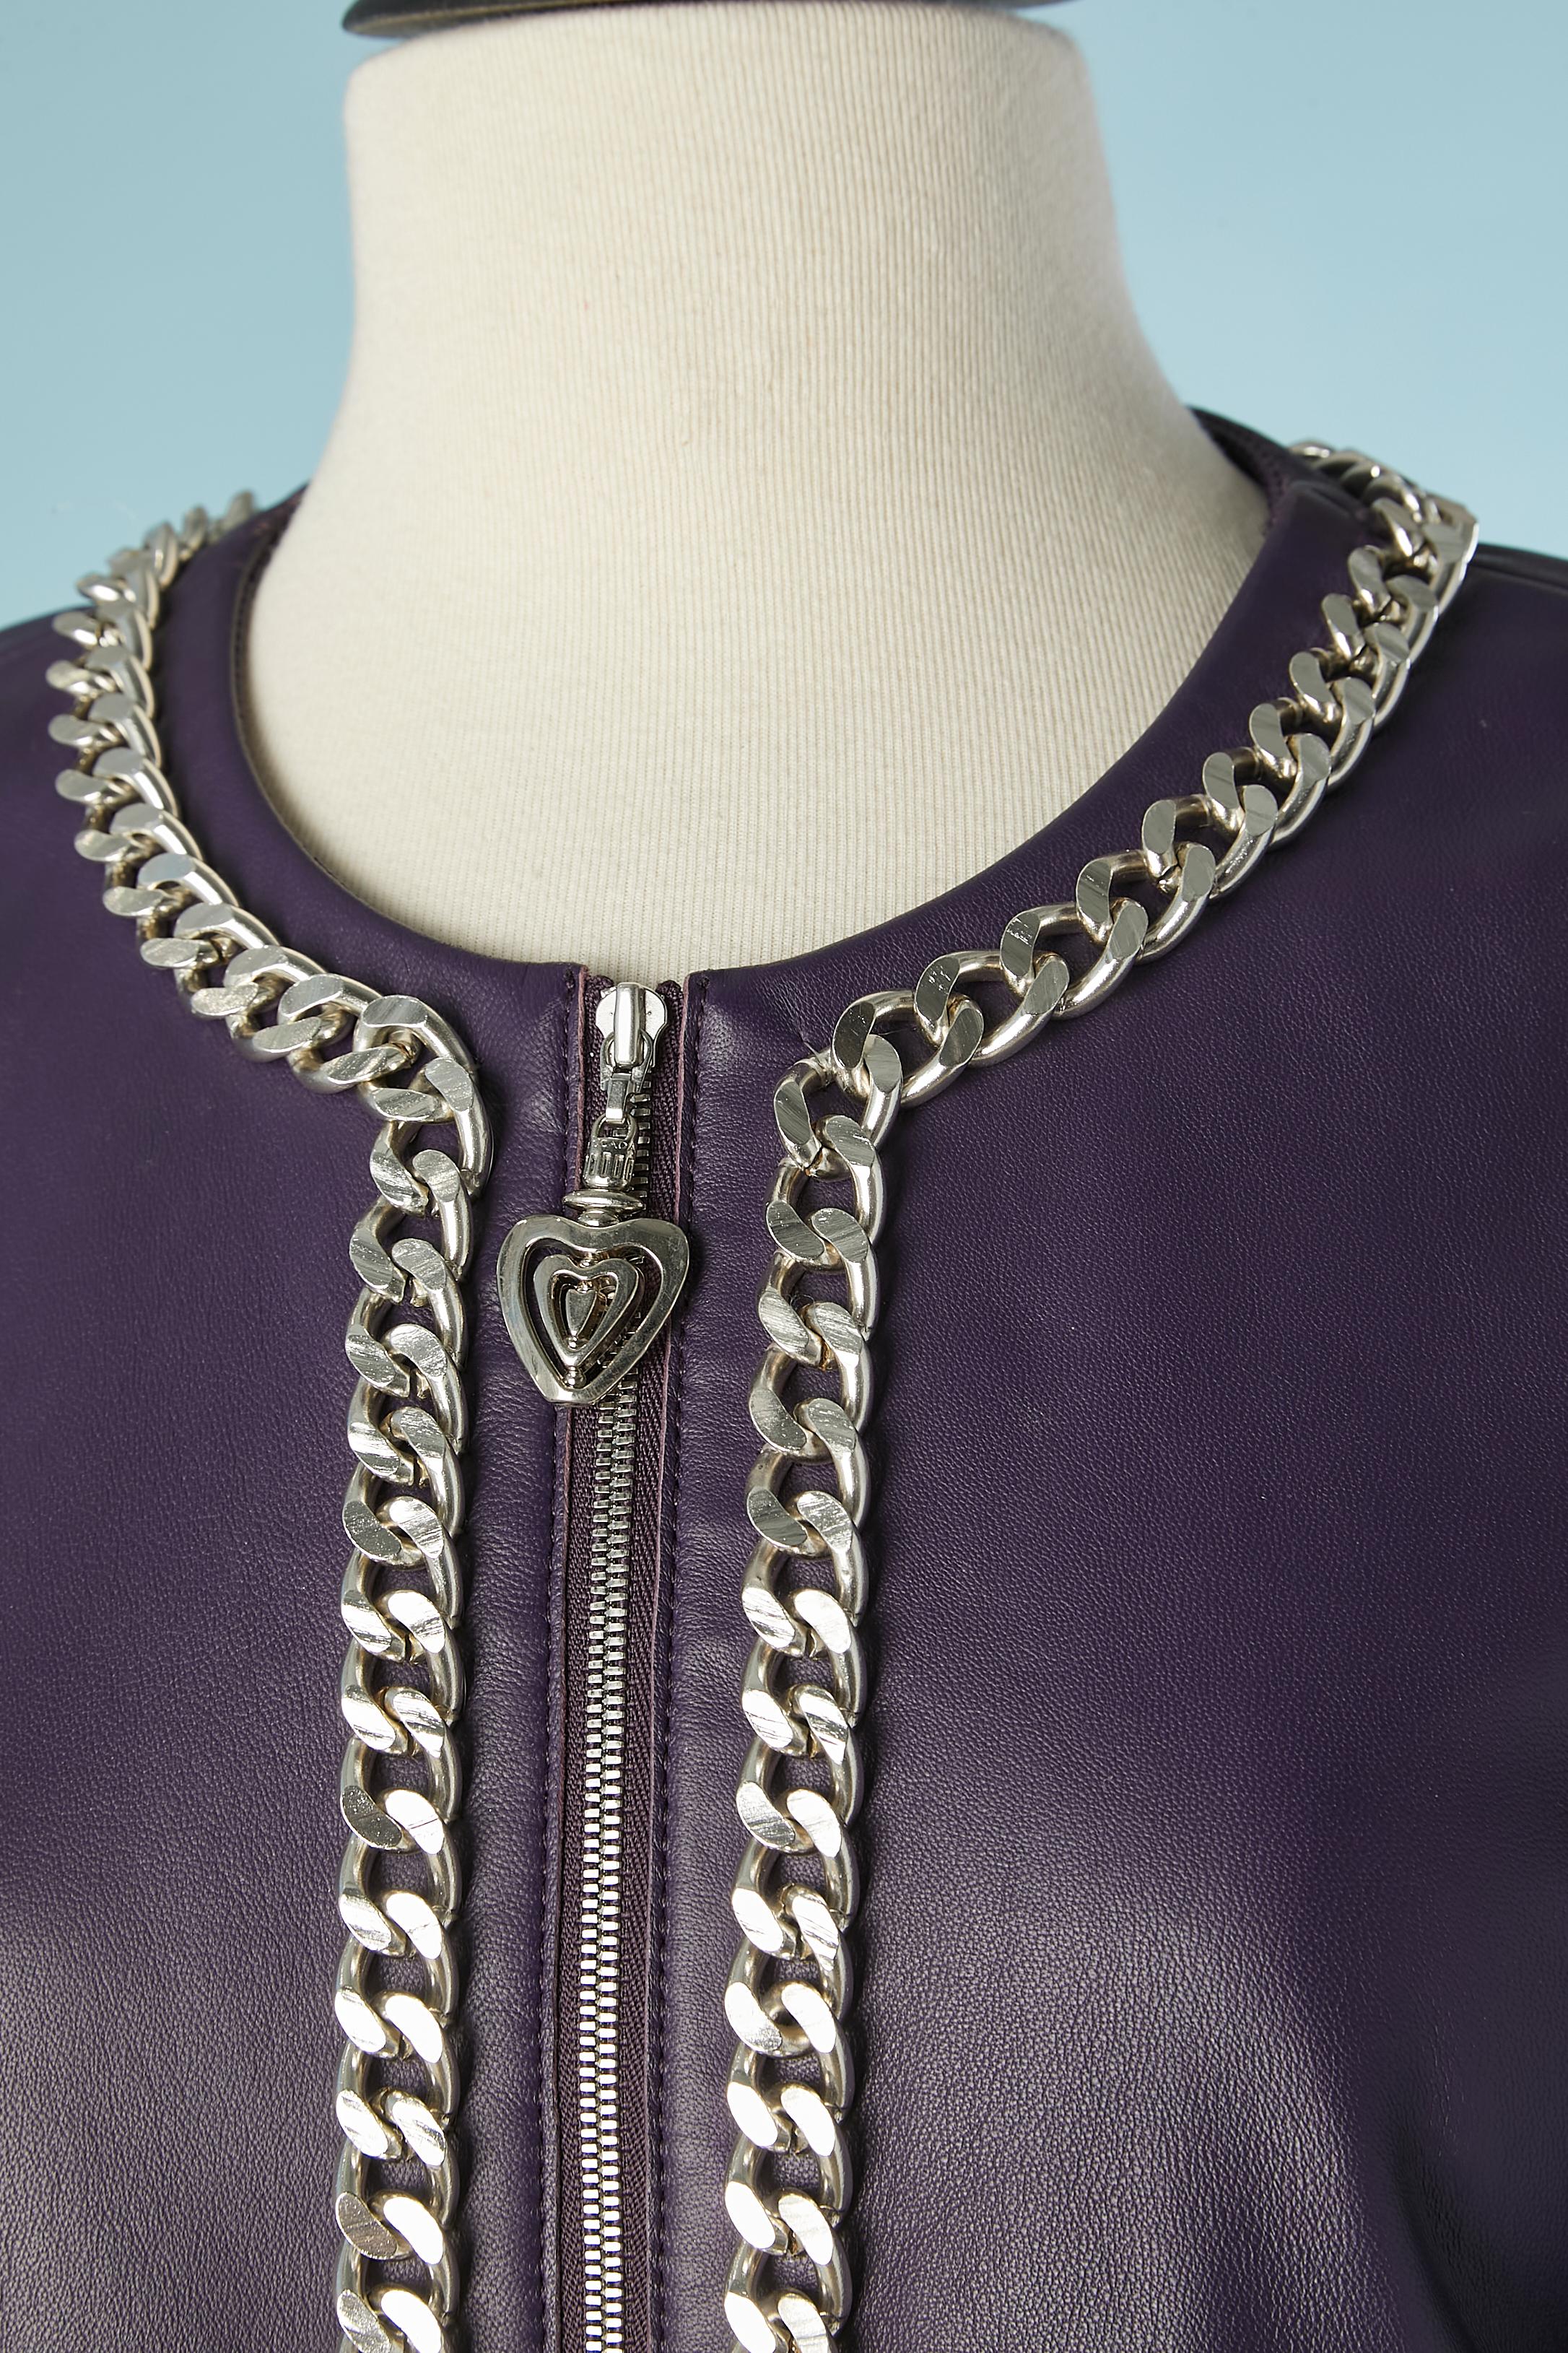 Purple leather jacket with silver chain, zip in the middle front.
Lining composition: 55% polyester, 45% rayon.
SIZE 34 / XS 